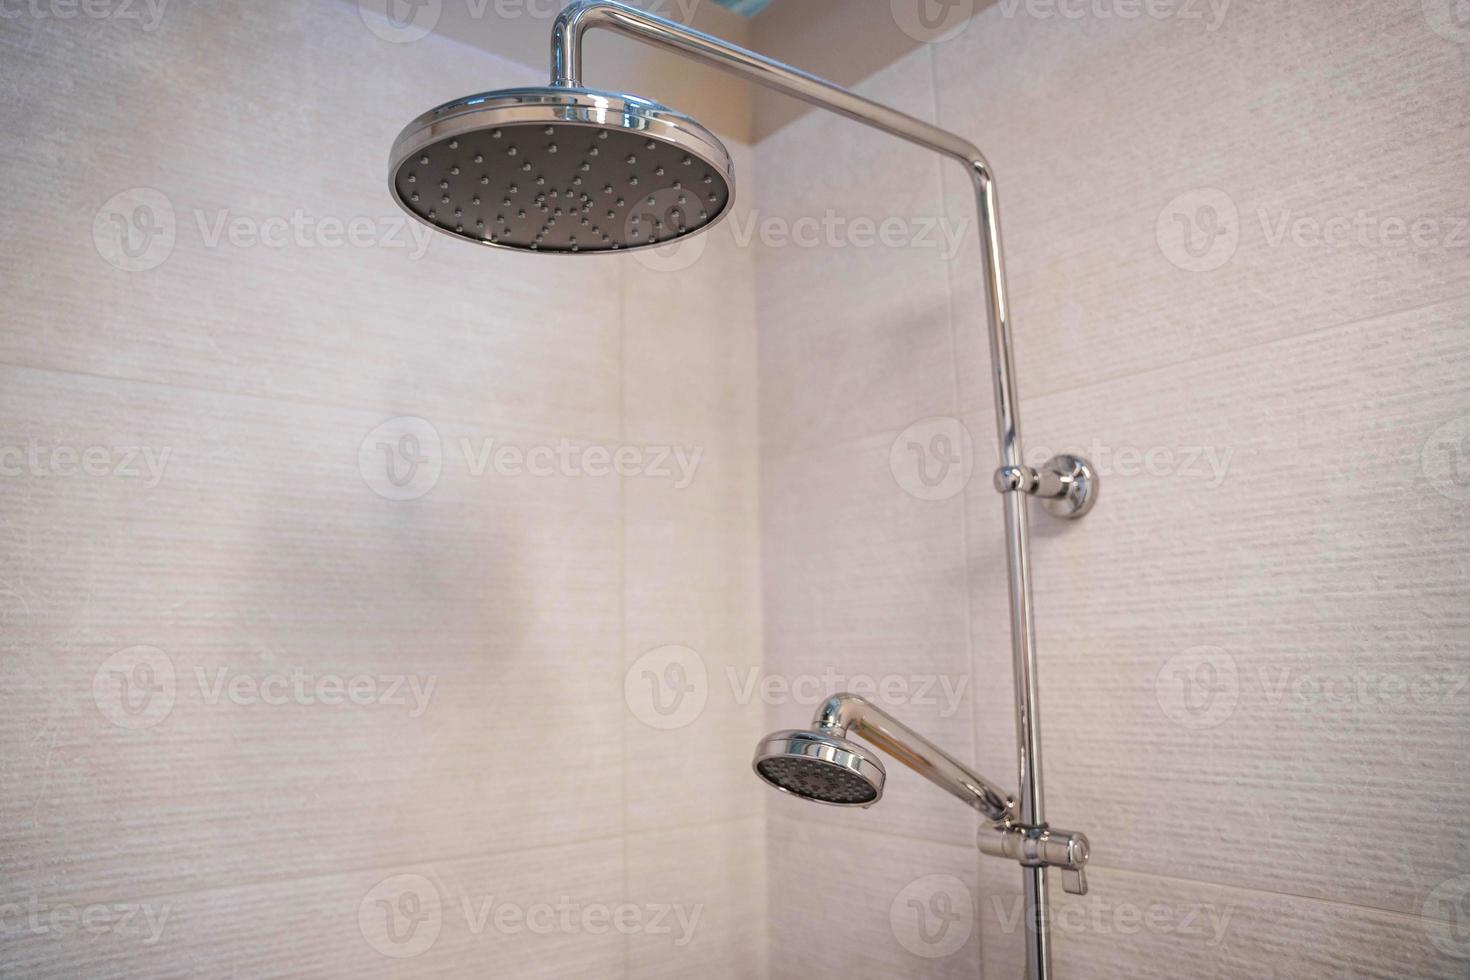 Shower on the bathroom wall. The atmosphere of a home bath photo